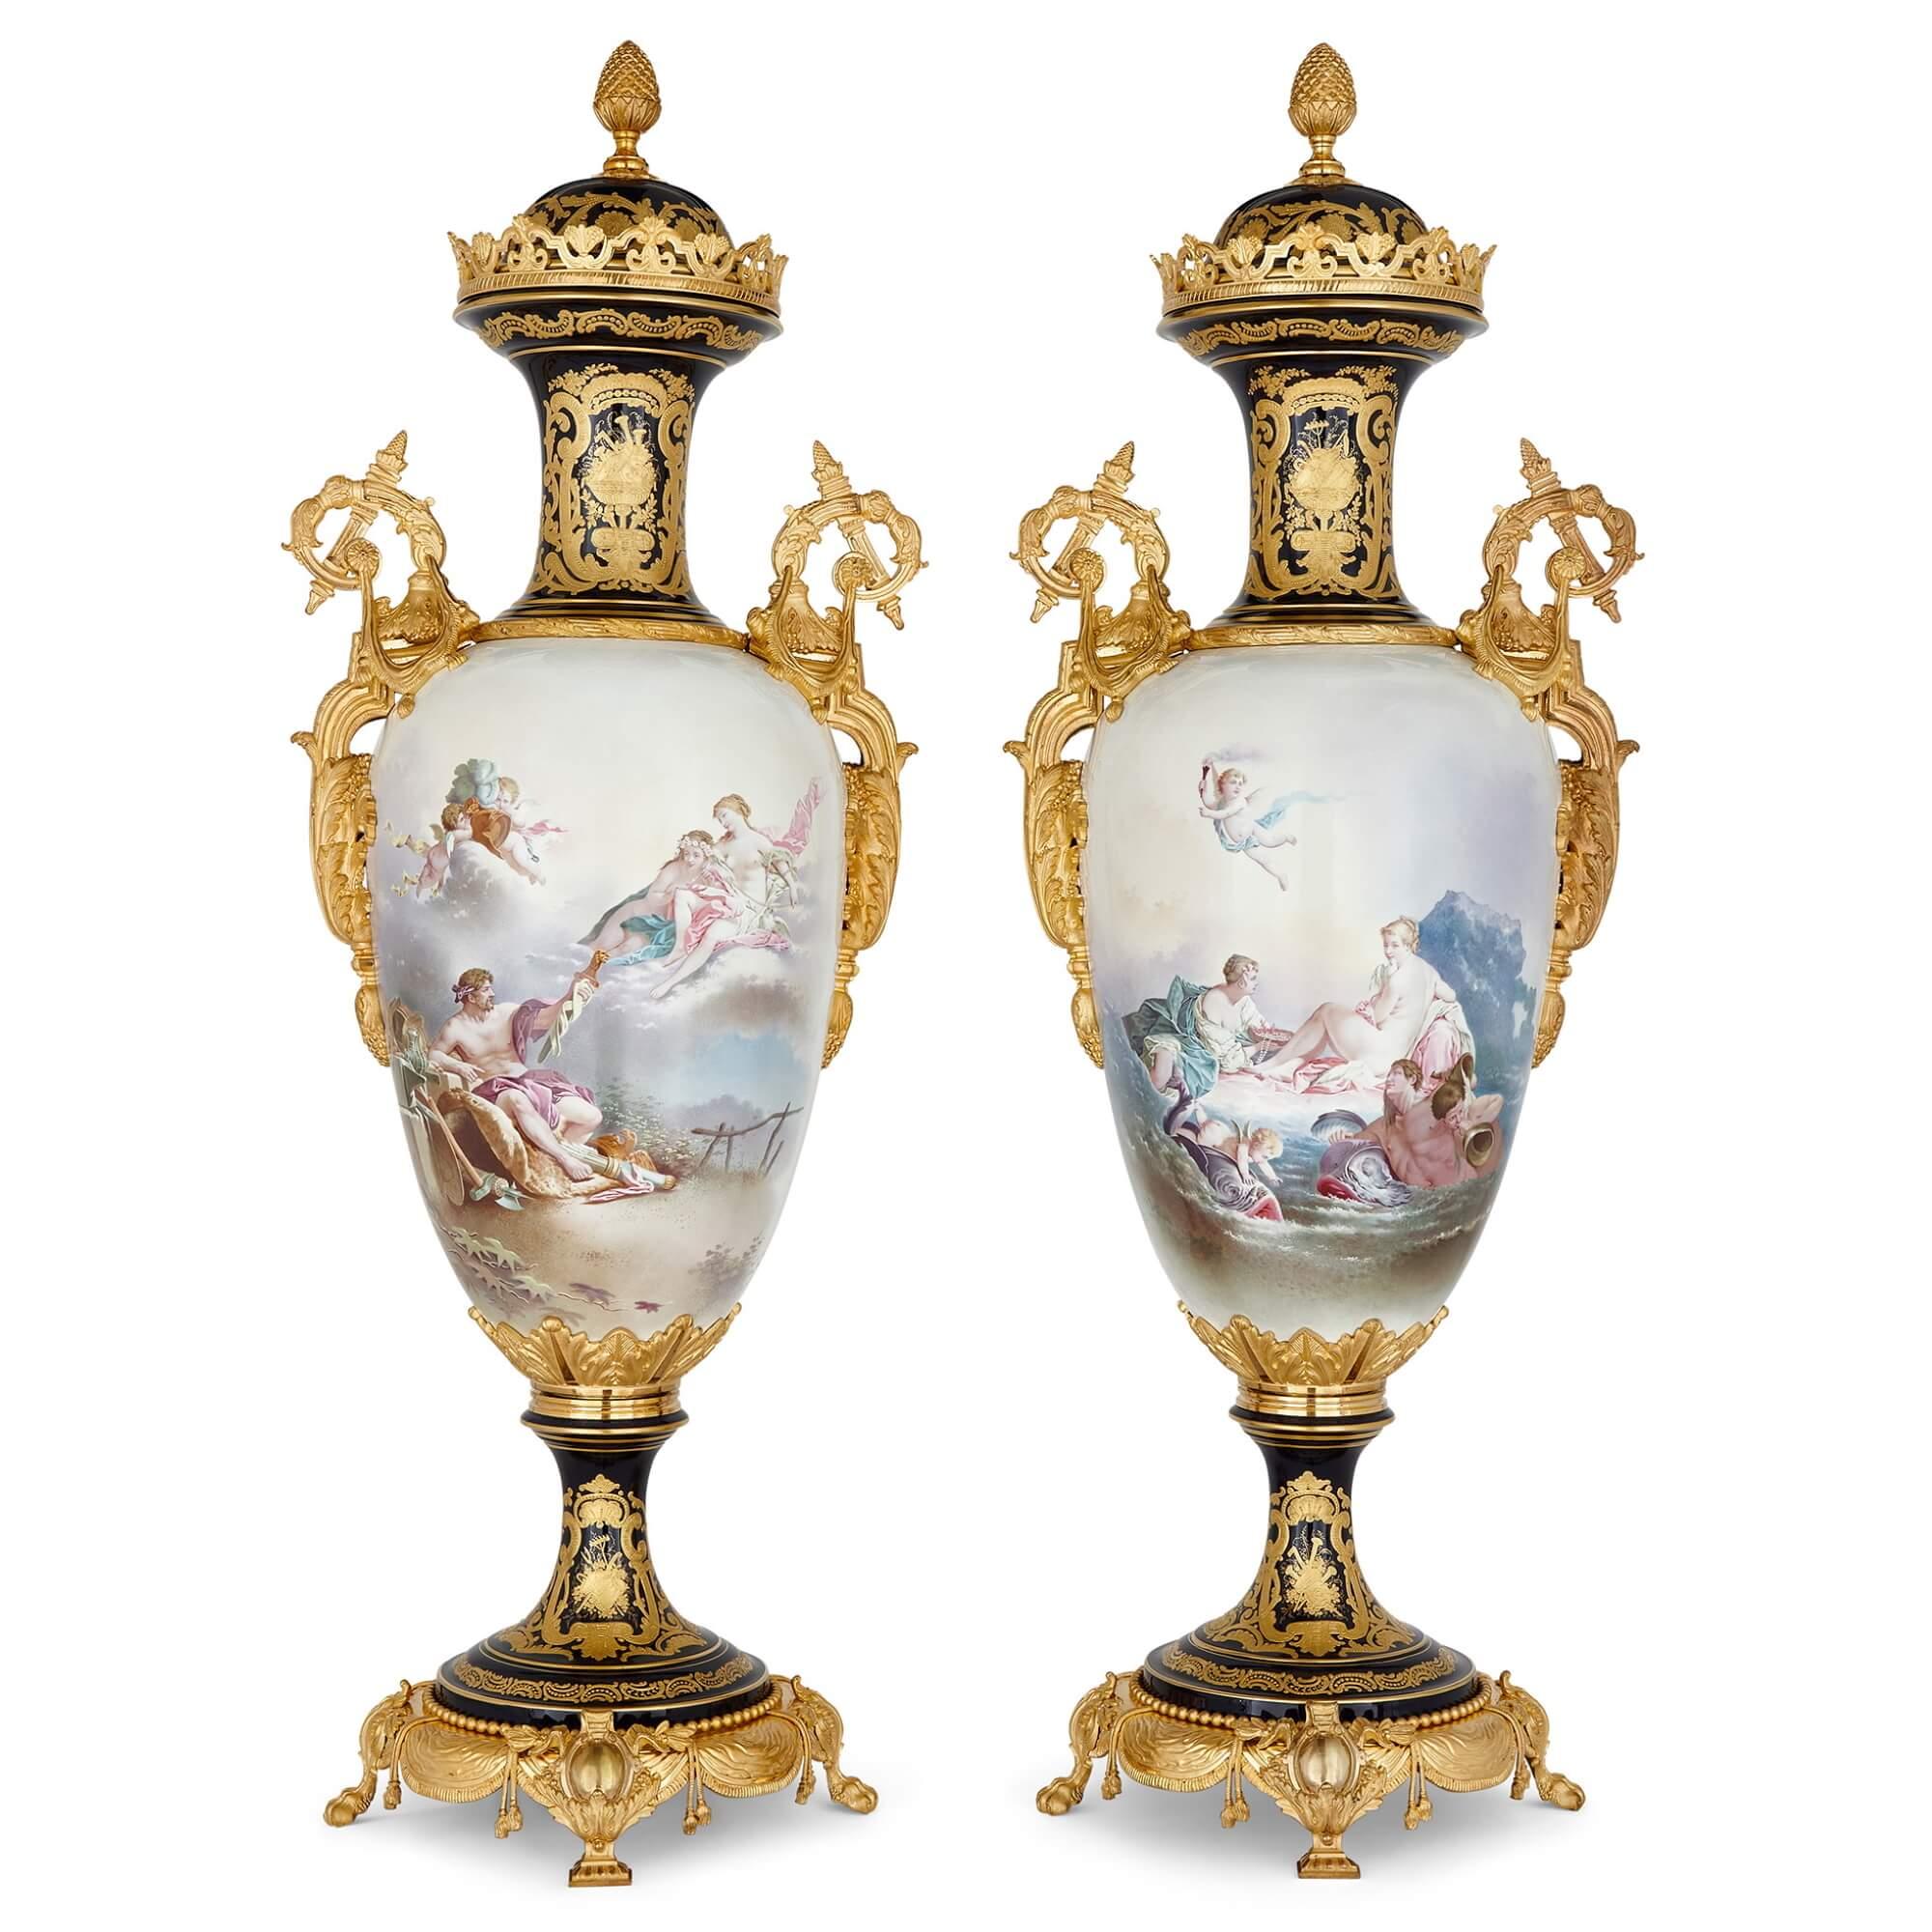 A pair of large ormolu mounted Sèvres style porcelain vases.
French, late 19th century.
Measures: height 130cm, width 45cm, depth 35cm.

These stunning porcelain vases were made in France in the late nineteenth century in superb Sèvres style.